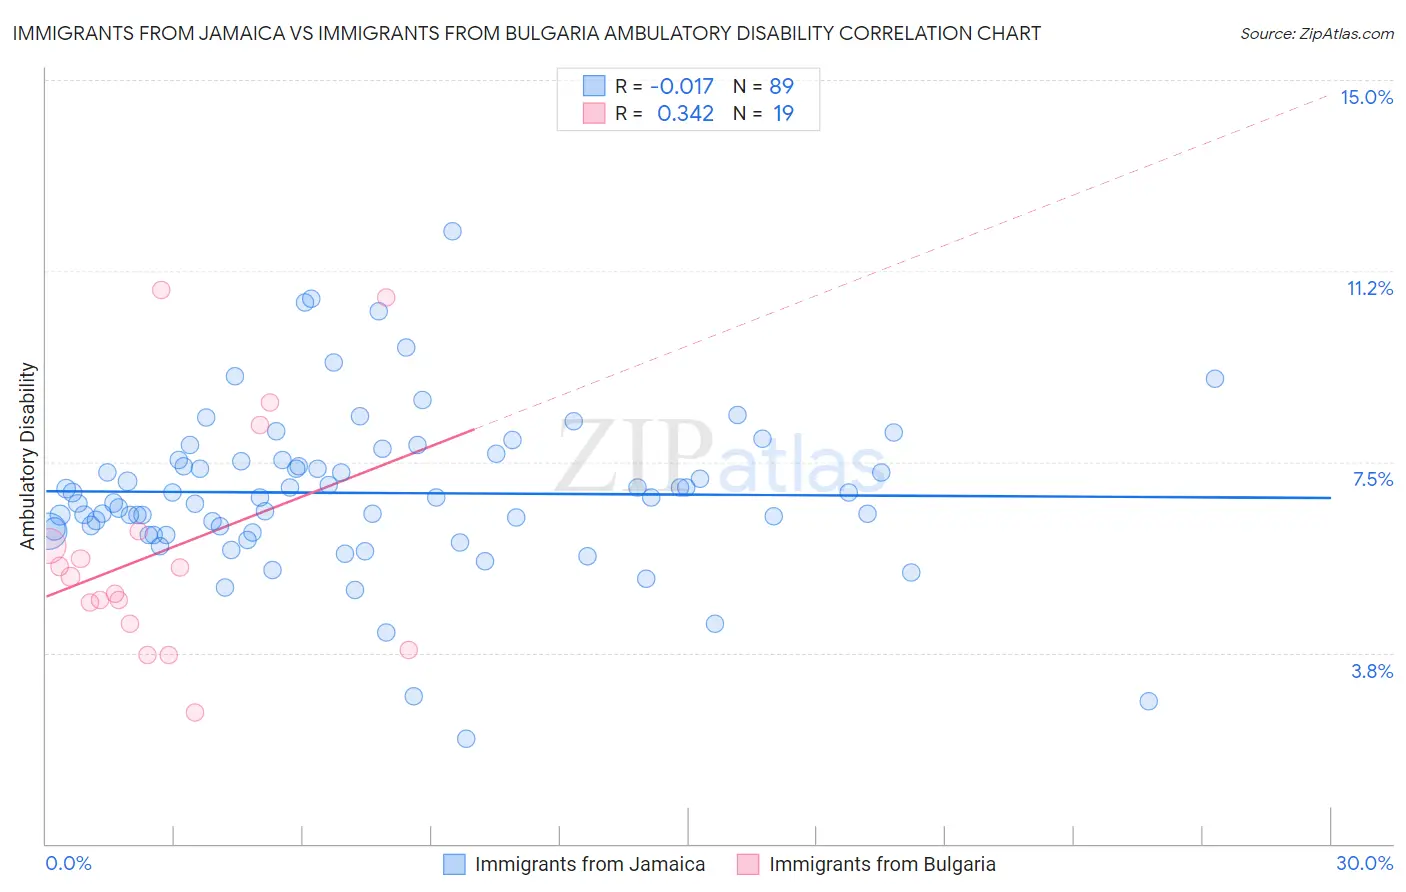 Immigrants from Jamaica vs Immigrants from Bulgaria Ambulatory Disability